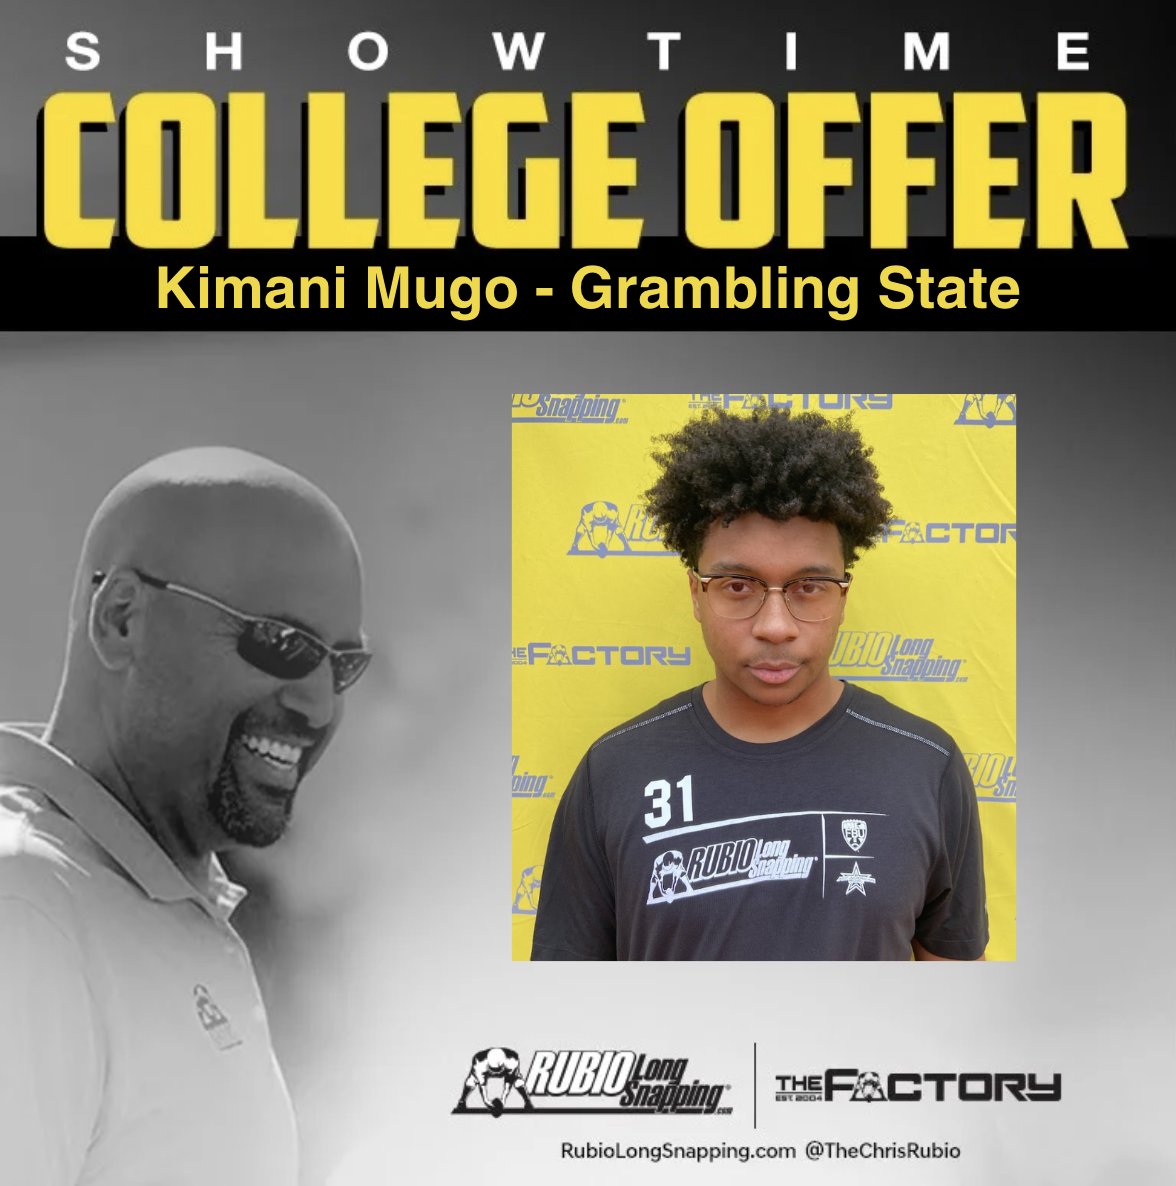 SHOWTIME!!! Rubio Long Snapper Kimani Mugo (transfer) has picked up an offer to.... #RubioFamily | #TheFactoryJustKeepsOnProducing